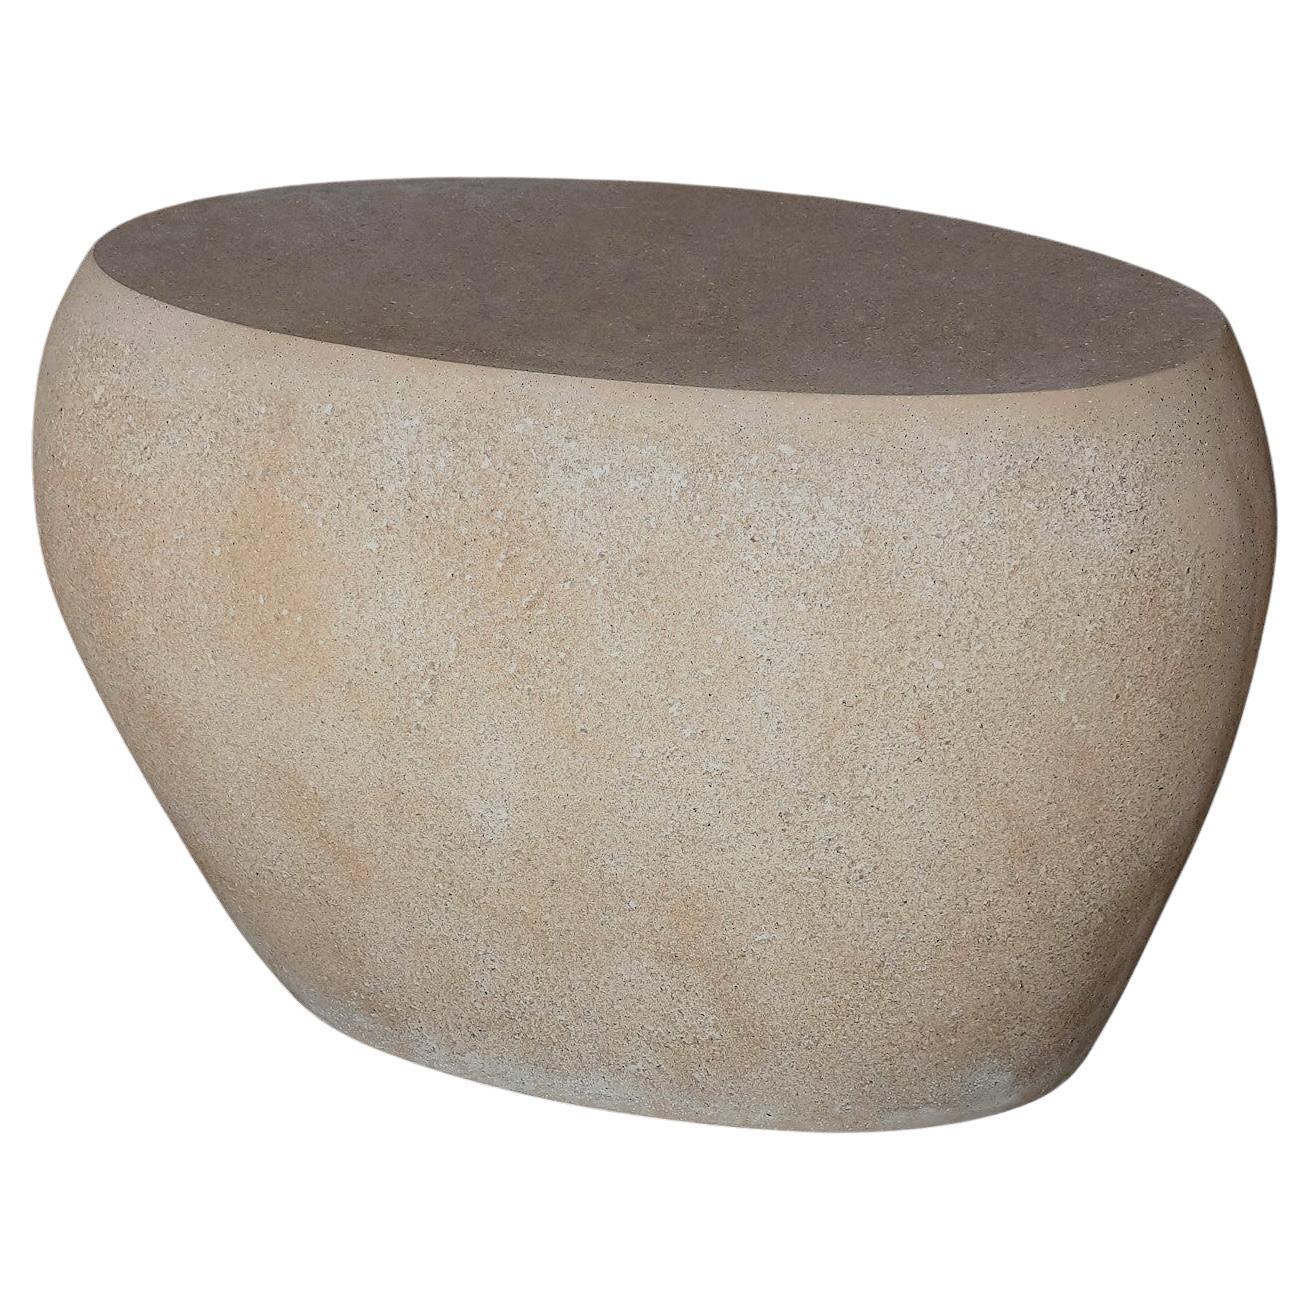 Cast Resin 'River Rock' Side Table, Aged Stone Finish by Zachary A. Design For Sale